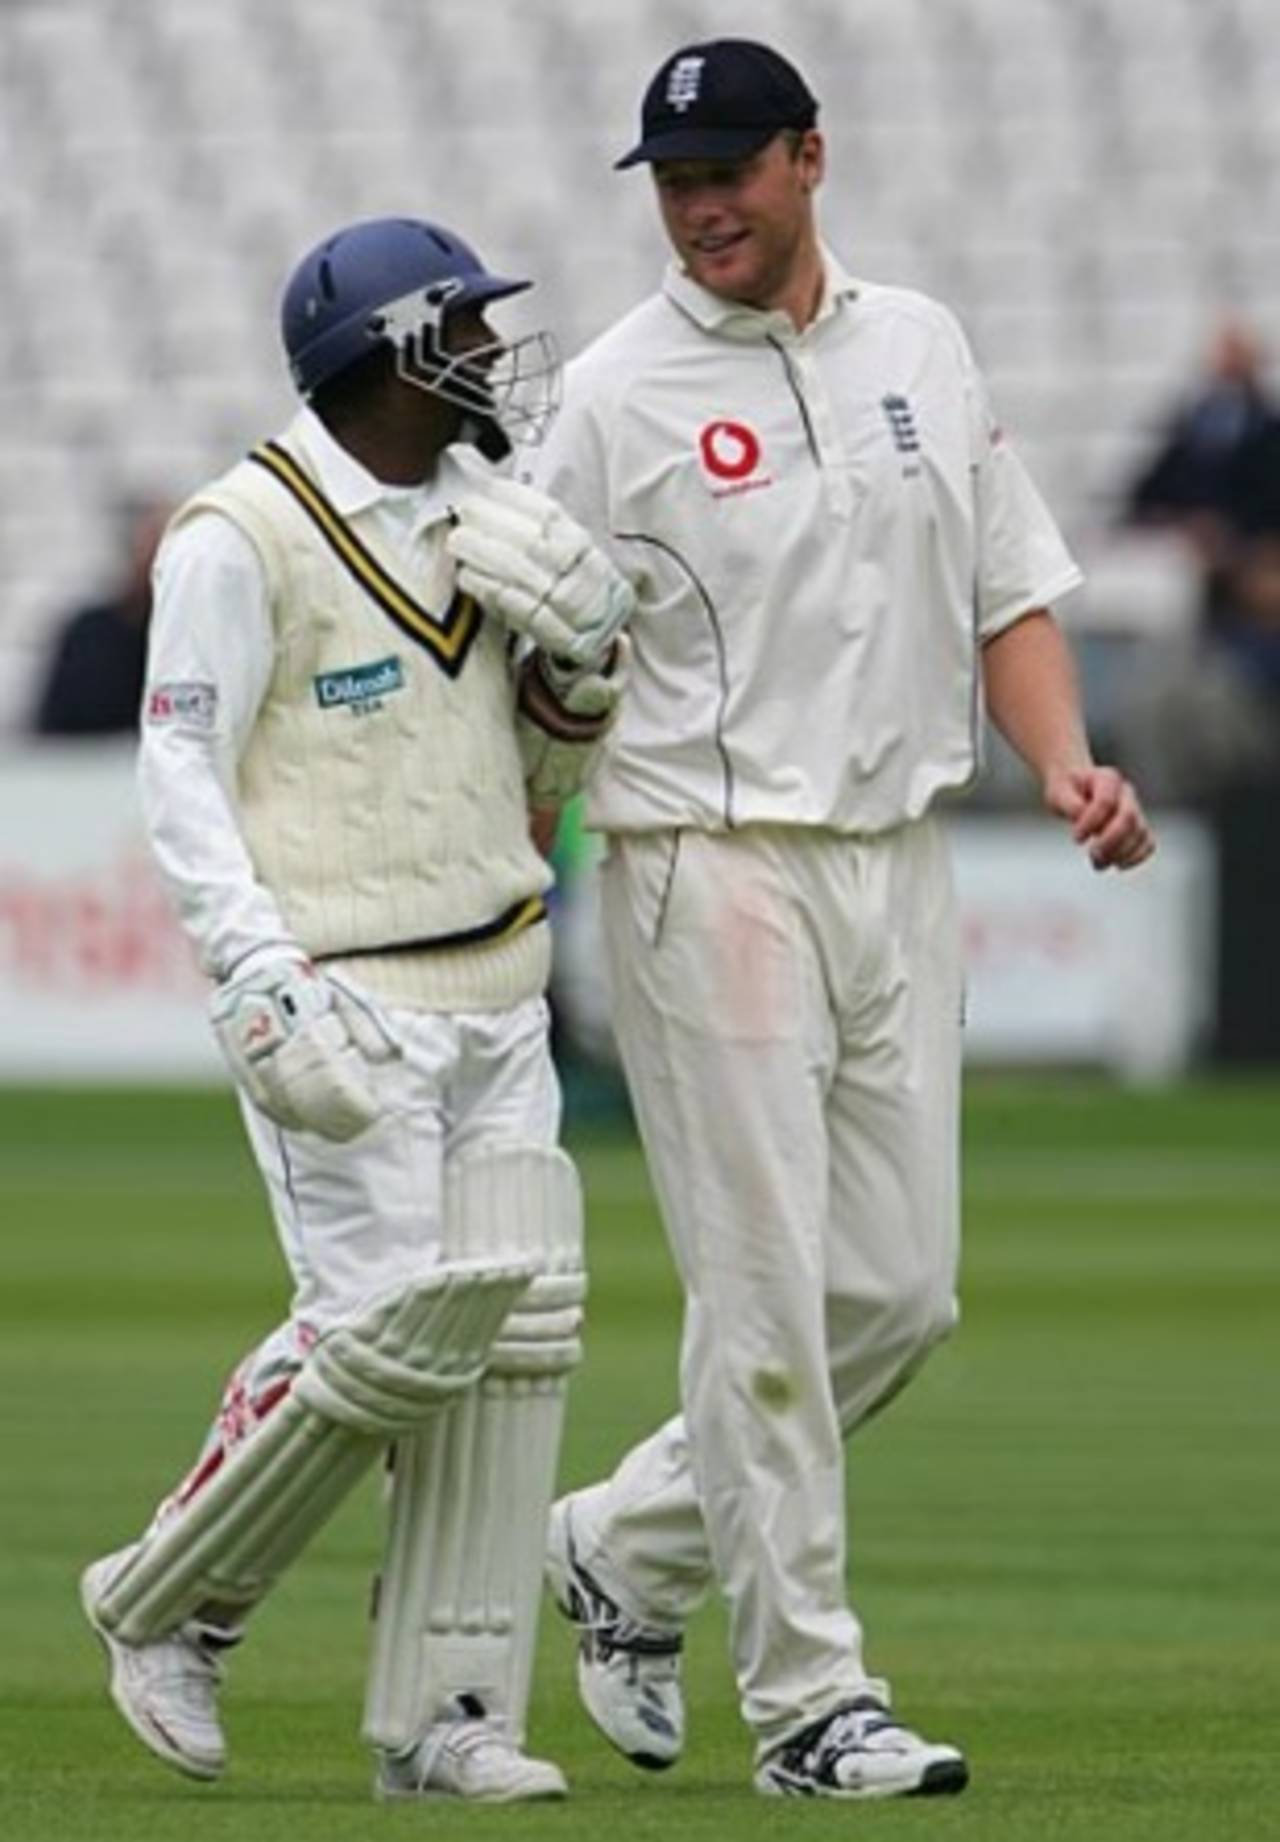 Andrew Flintoff and Muttiah Muralitharan chat after bad light forced players off, England v Sri Lanka, 1st Test, Lord's, May 15, 2006